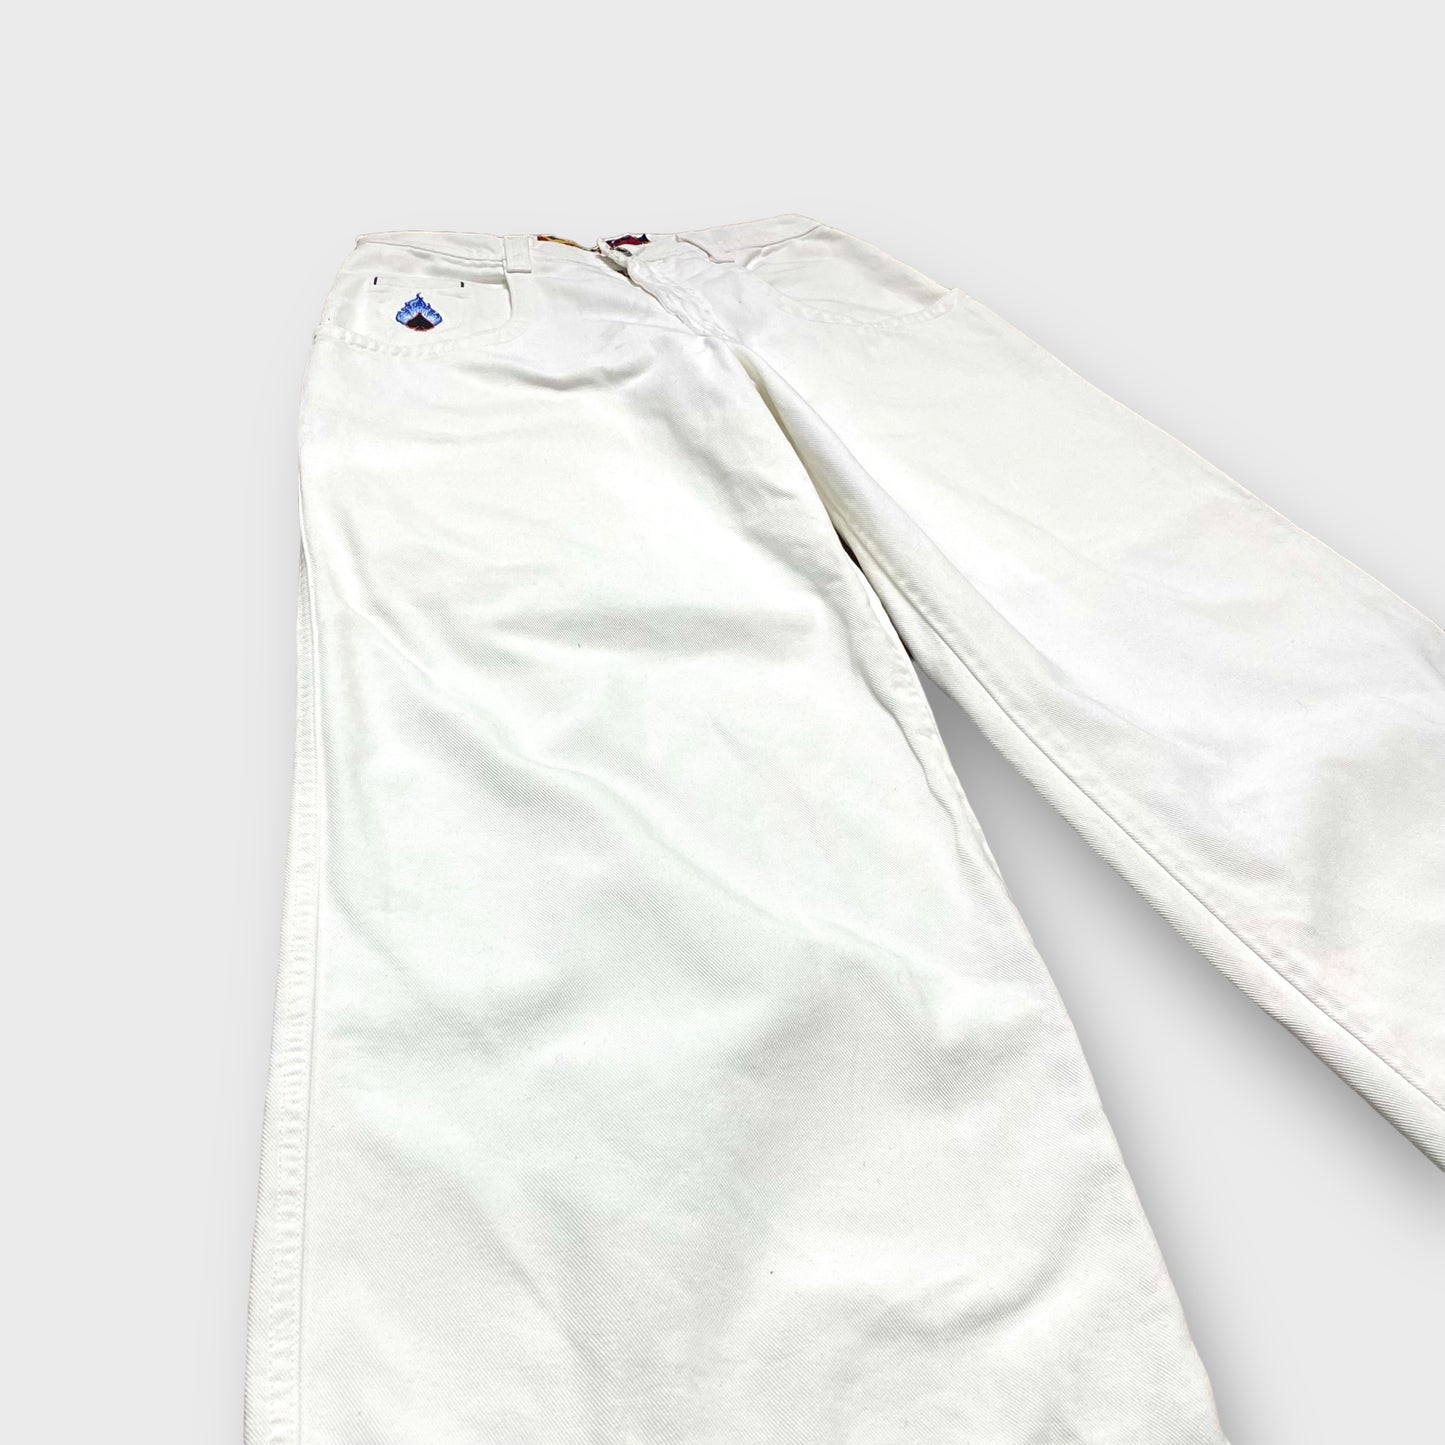 "JNCO JEANS" Baggy flare white color denim pants